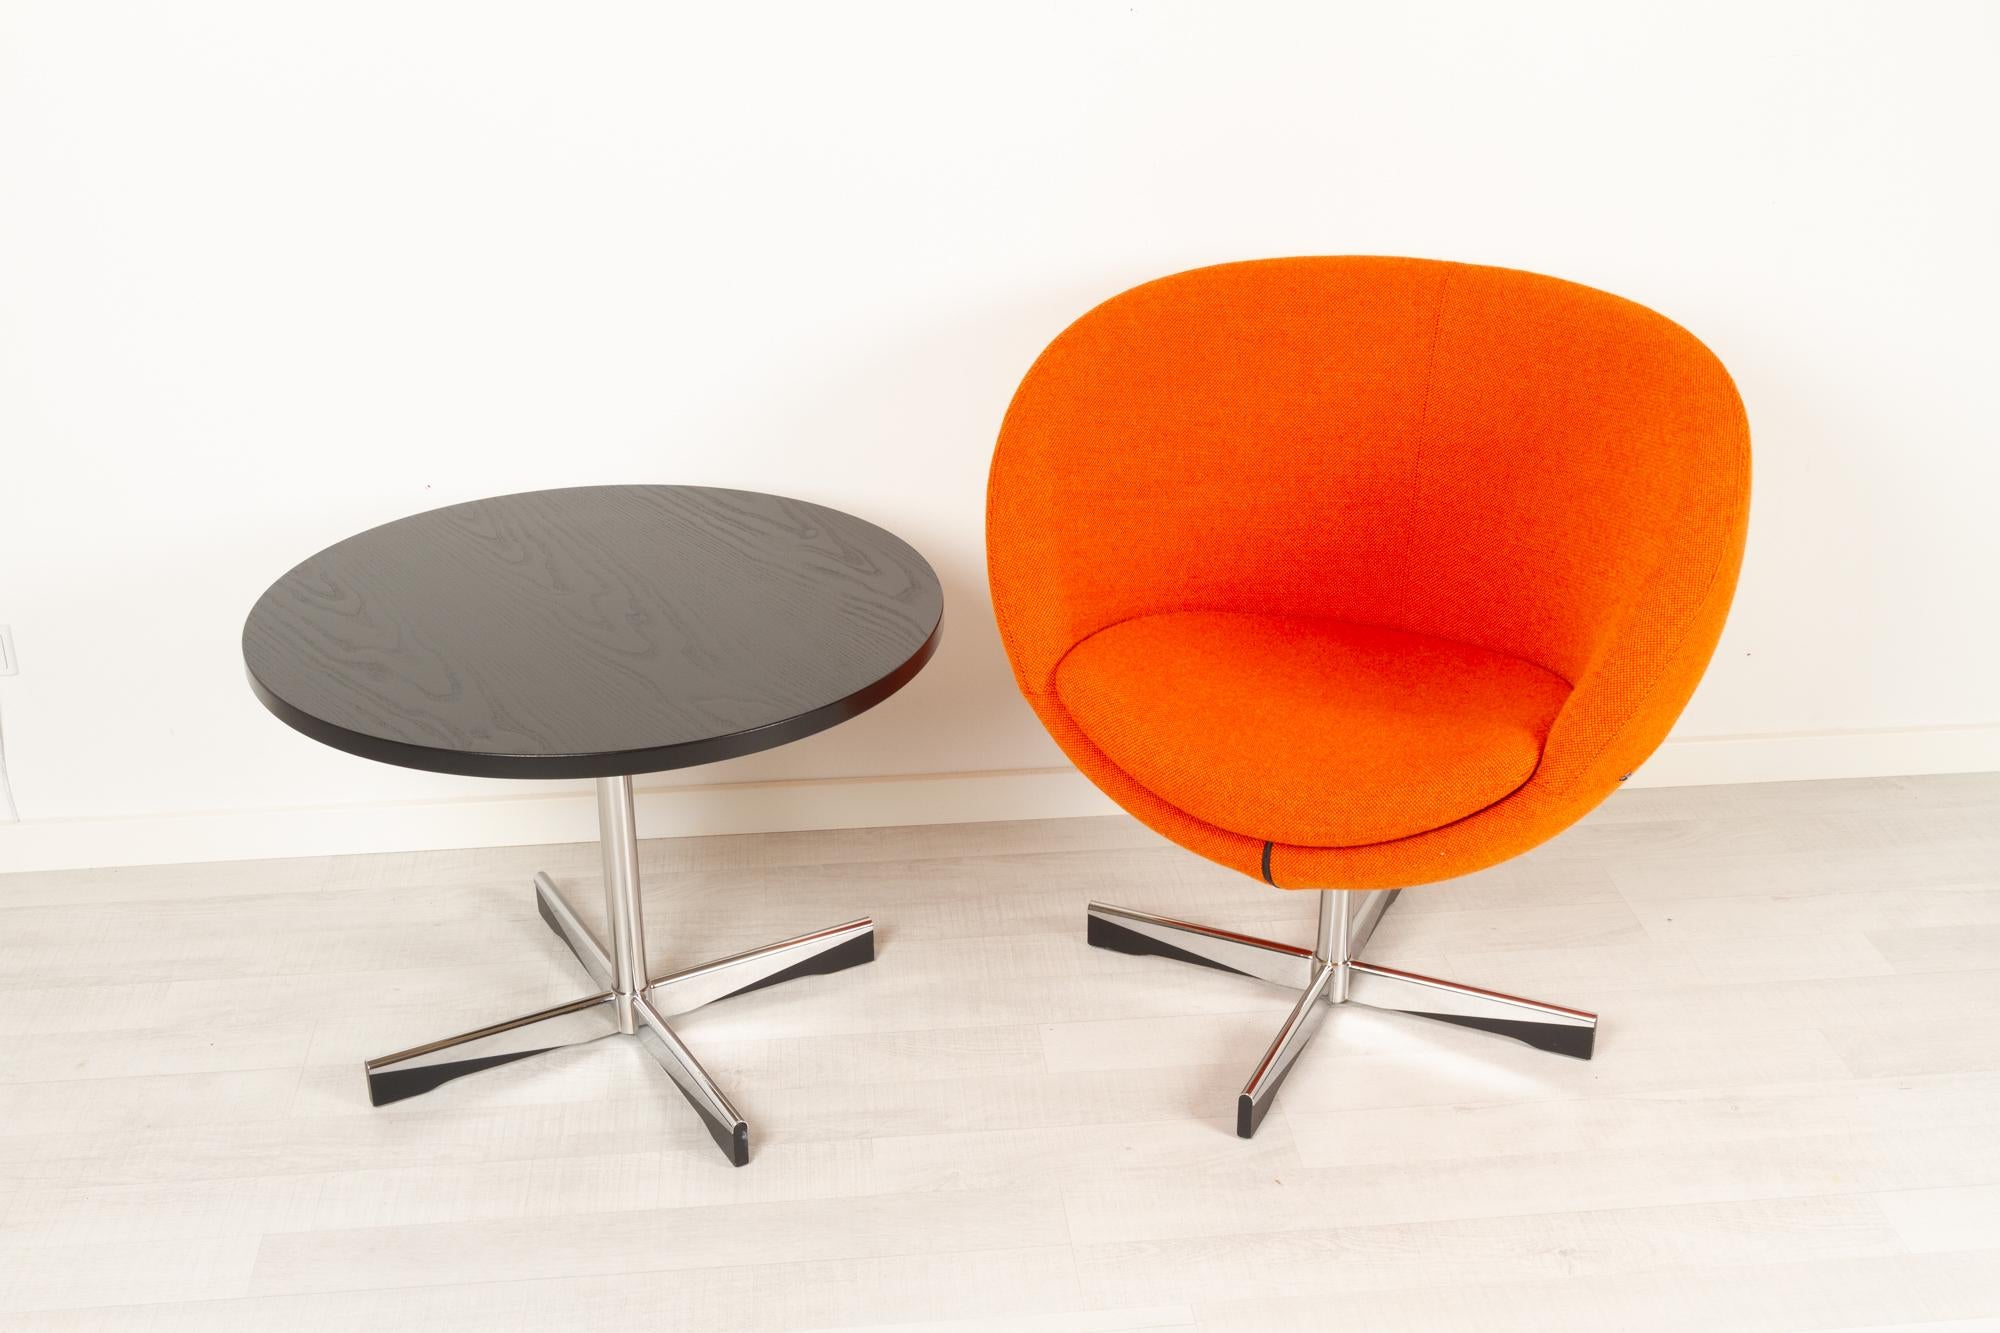 Scandinavian modern lounge chair and table by Sven Ivar Dysthe, 21st century
The model planet chair was designed by Sven Ivar Dysthe in 1965. The chair is an established Norwegian furniture Classic. The encompassing round shape provides a very